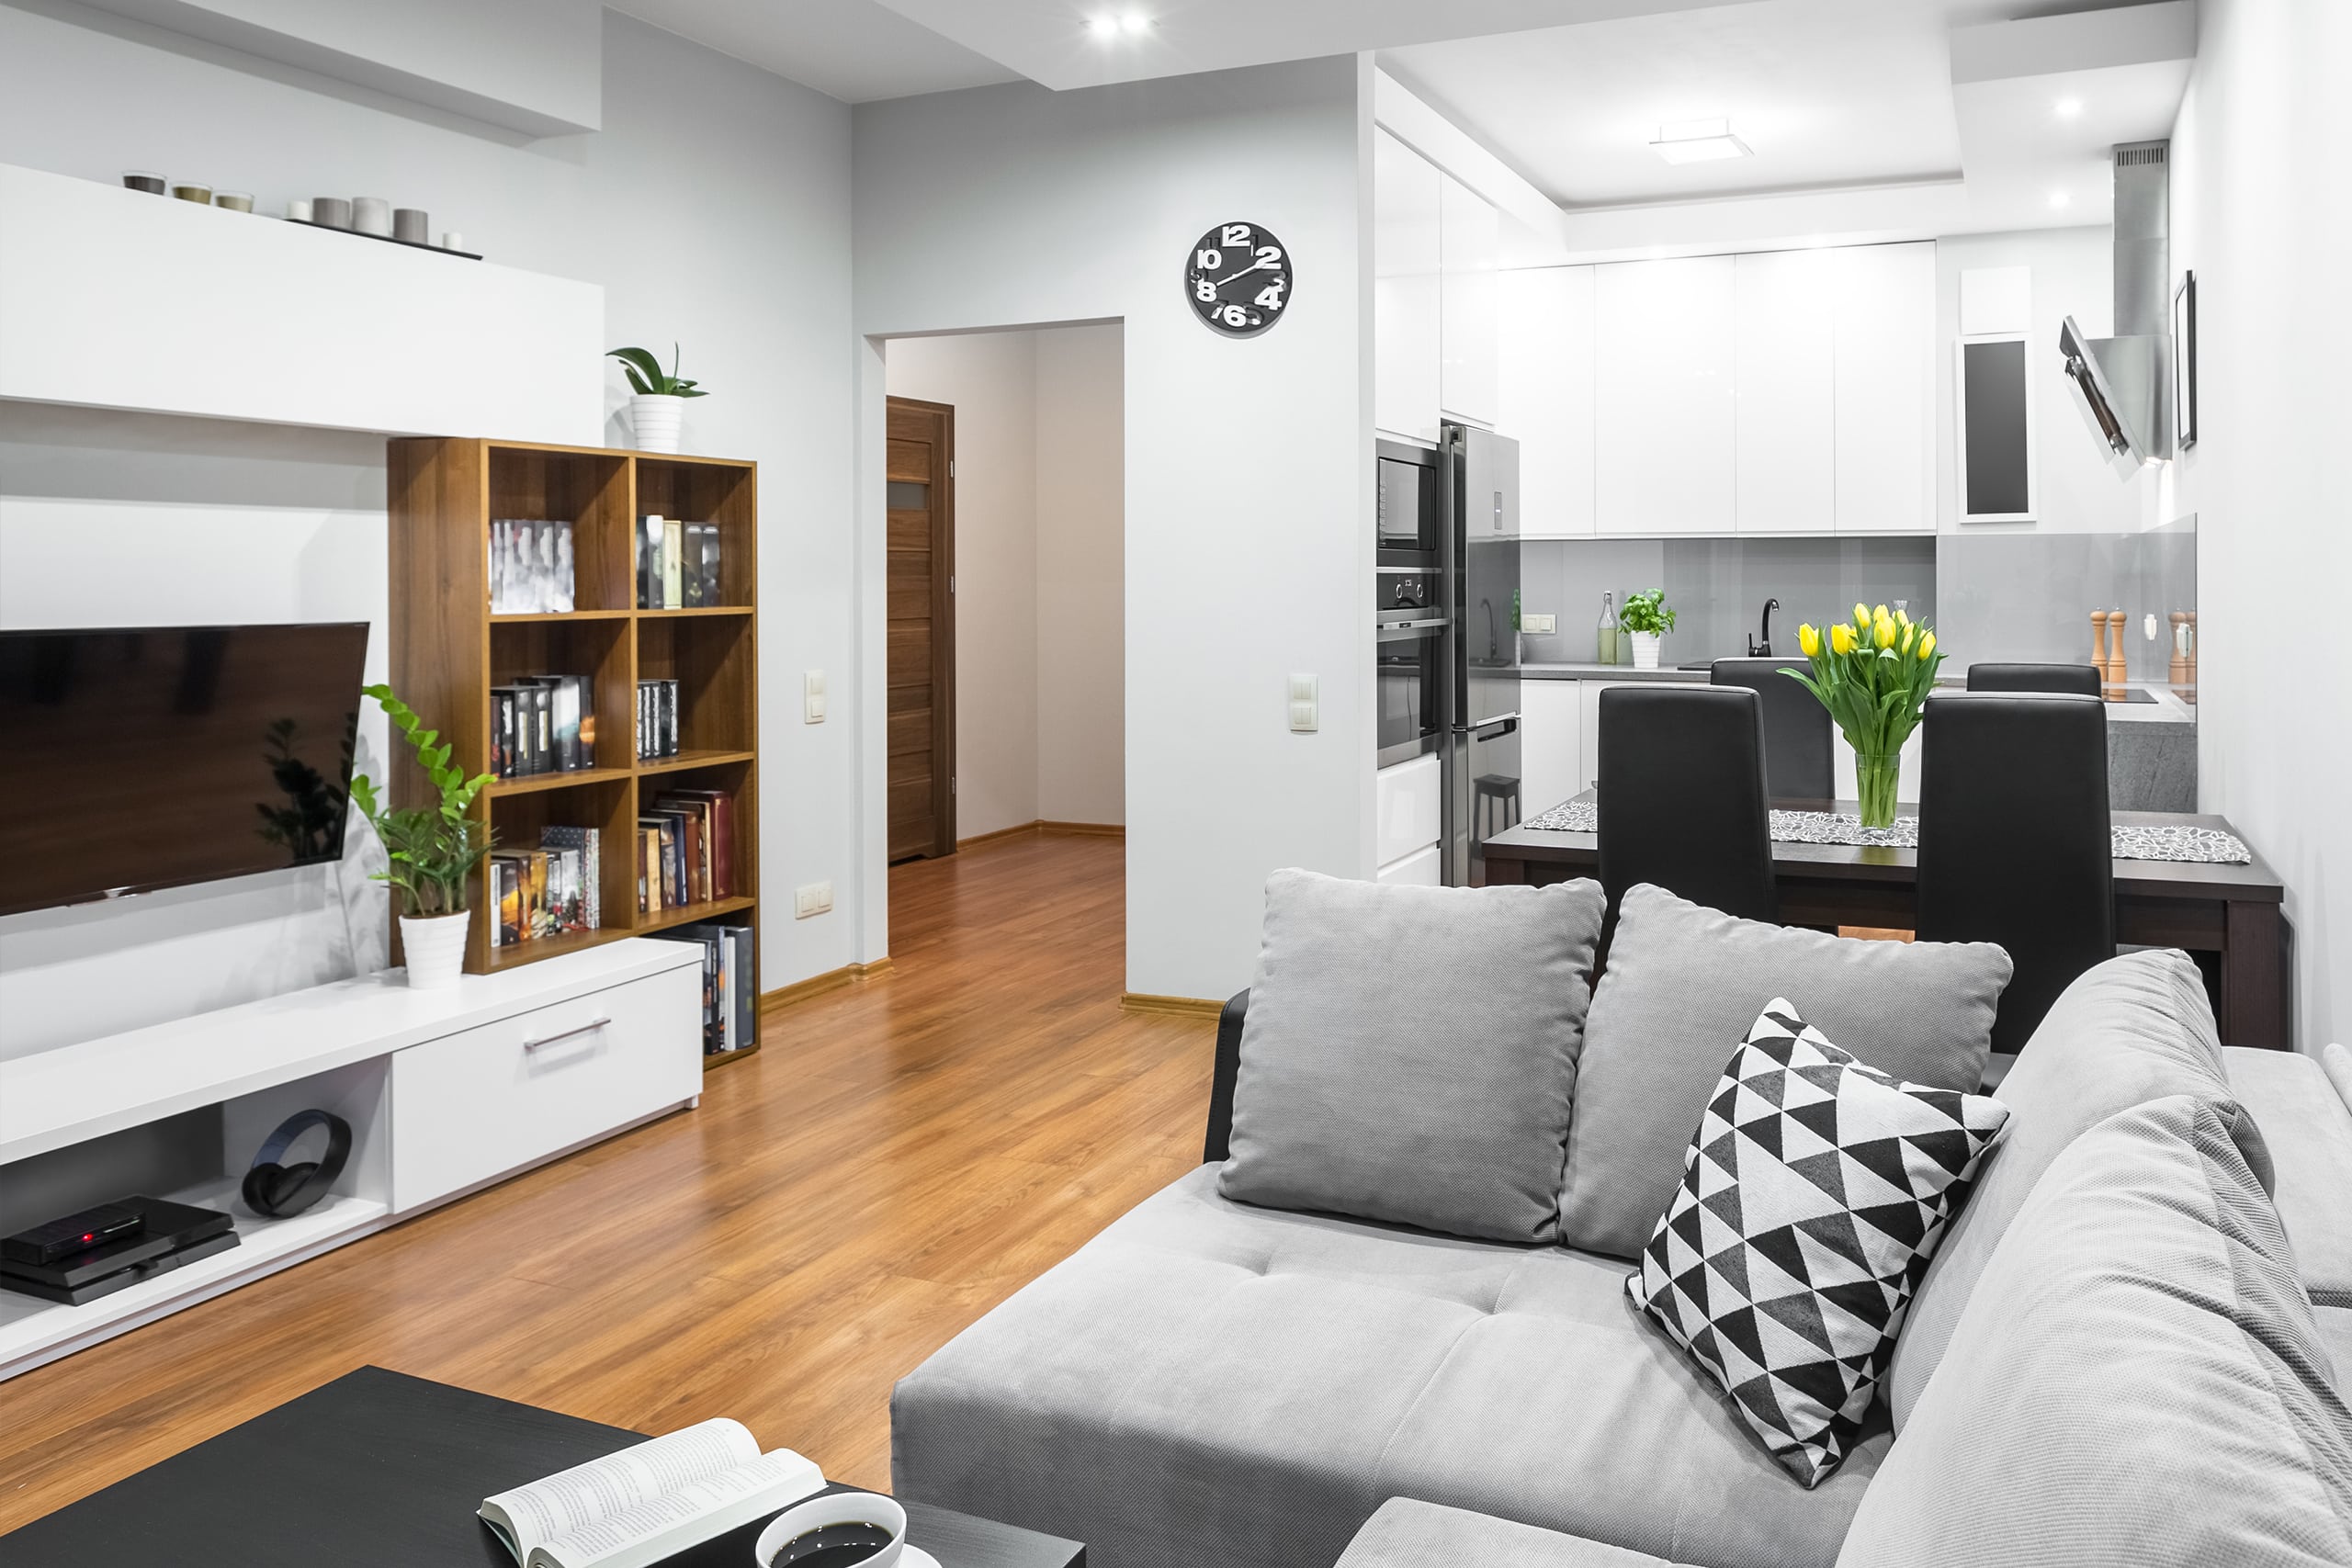 6 Tips for Getting Your Home Ready to Sell in 2020 - Rashid Notash